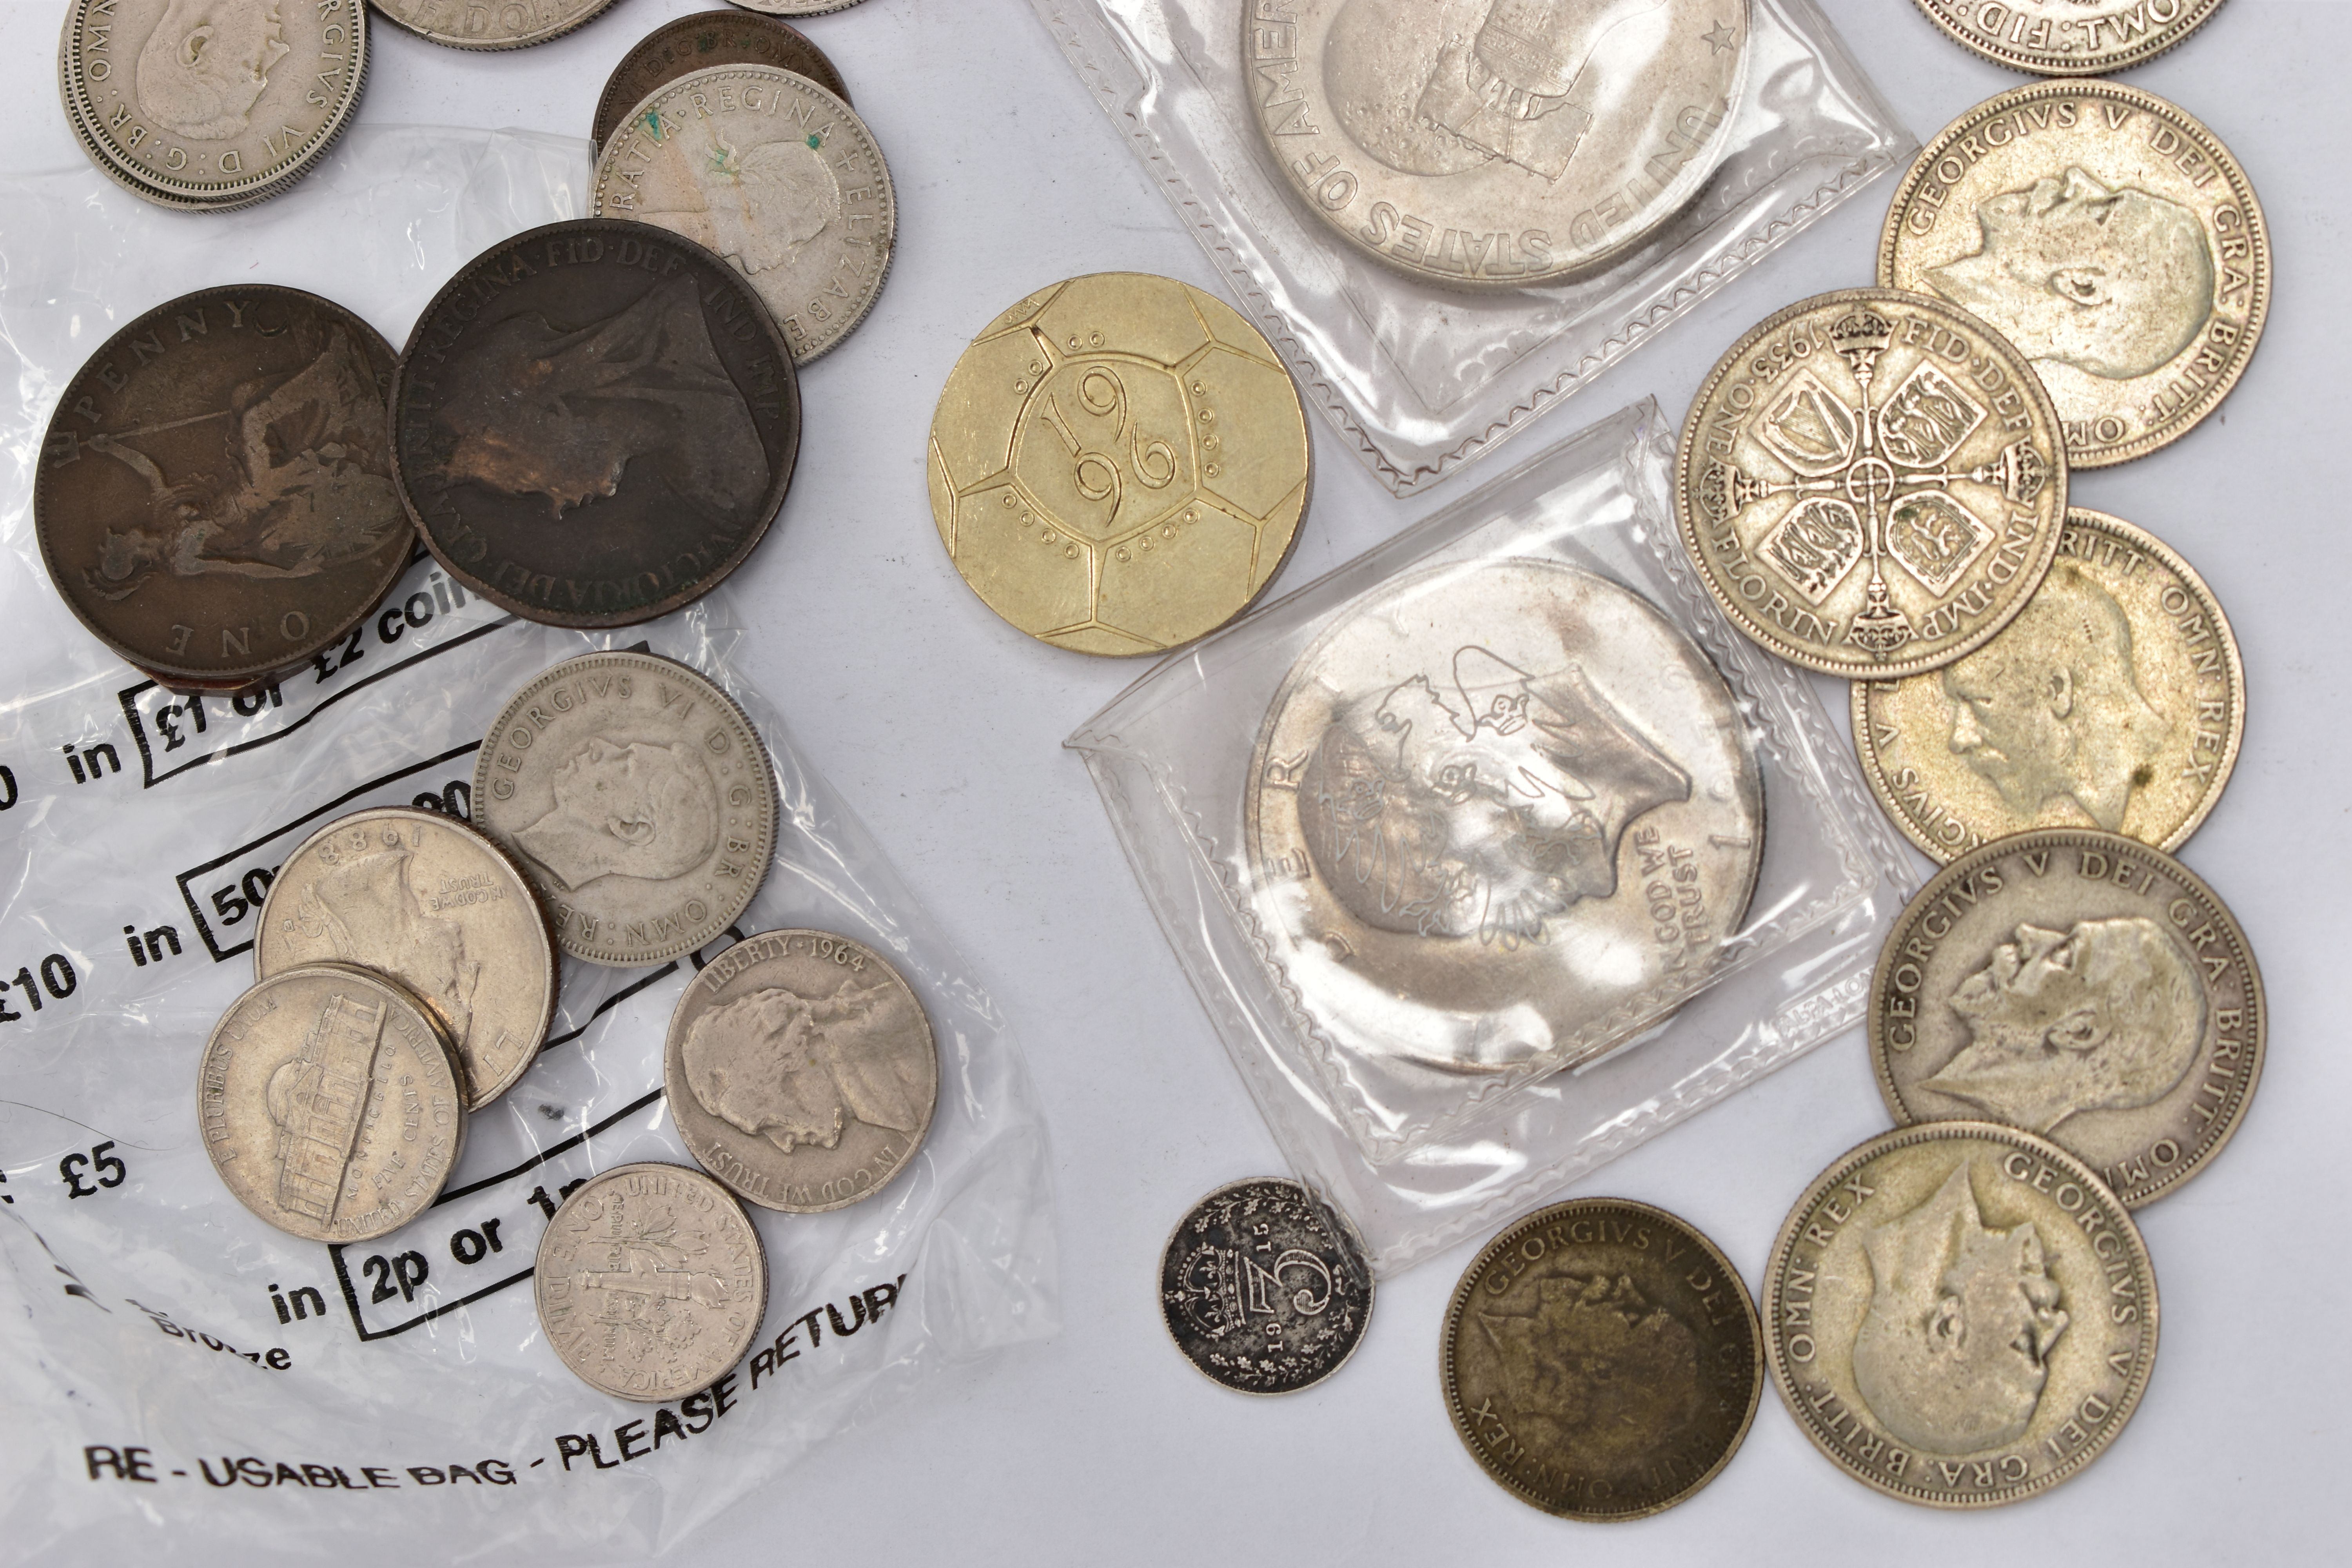 A PLASTIC BAG CONTAINING 20th CENTURY OVER 150 gr .500 SILVER COINS other Silver coins etc - Image 4 of 4